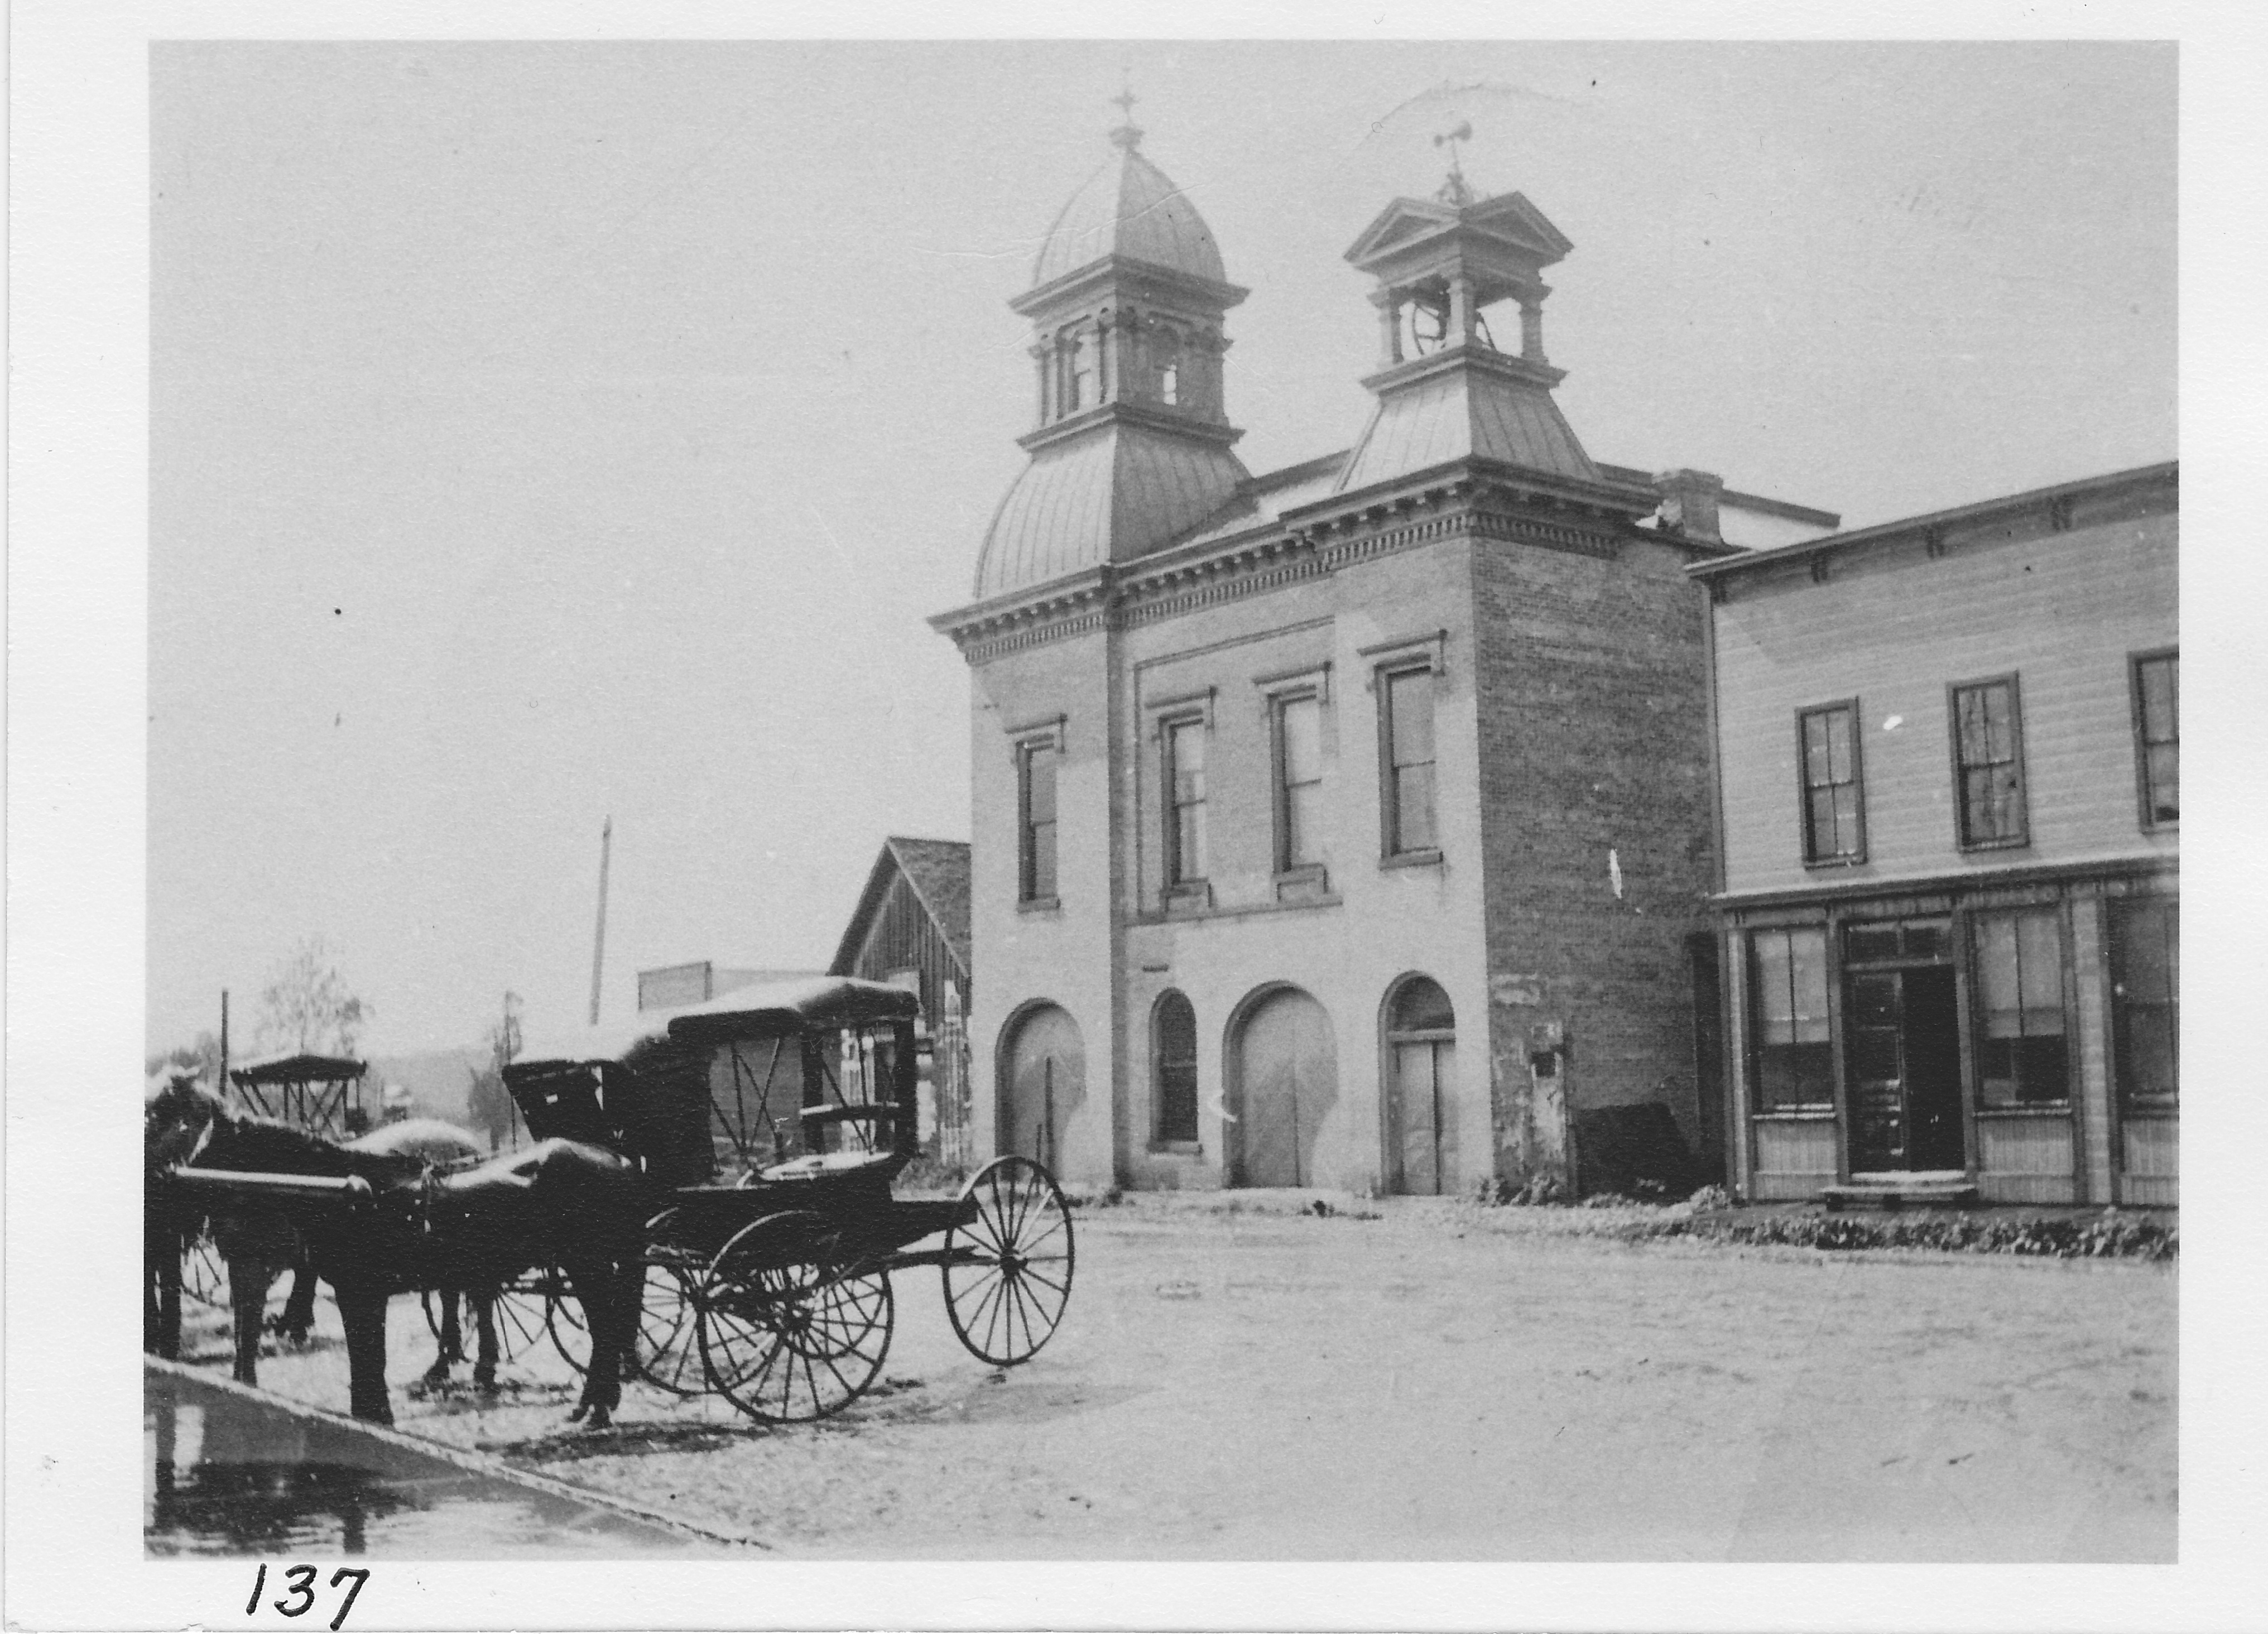 New City Hall built in 1885, dedicated in 1886. Later used by fire department.